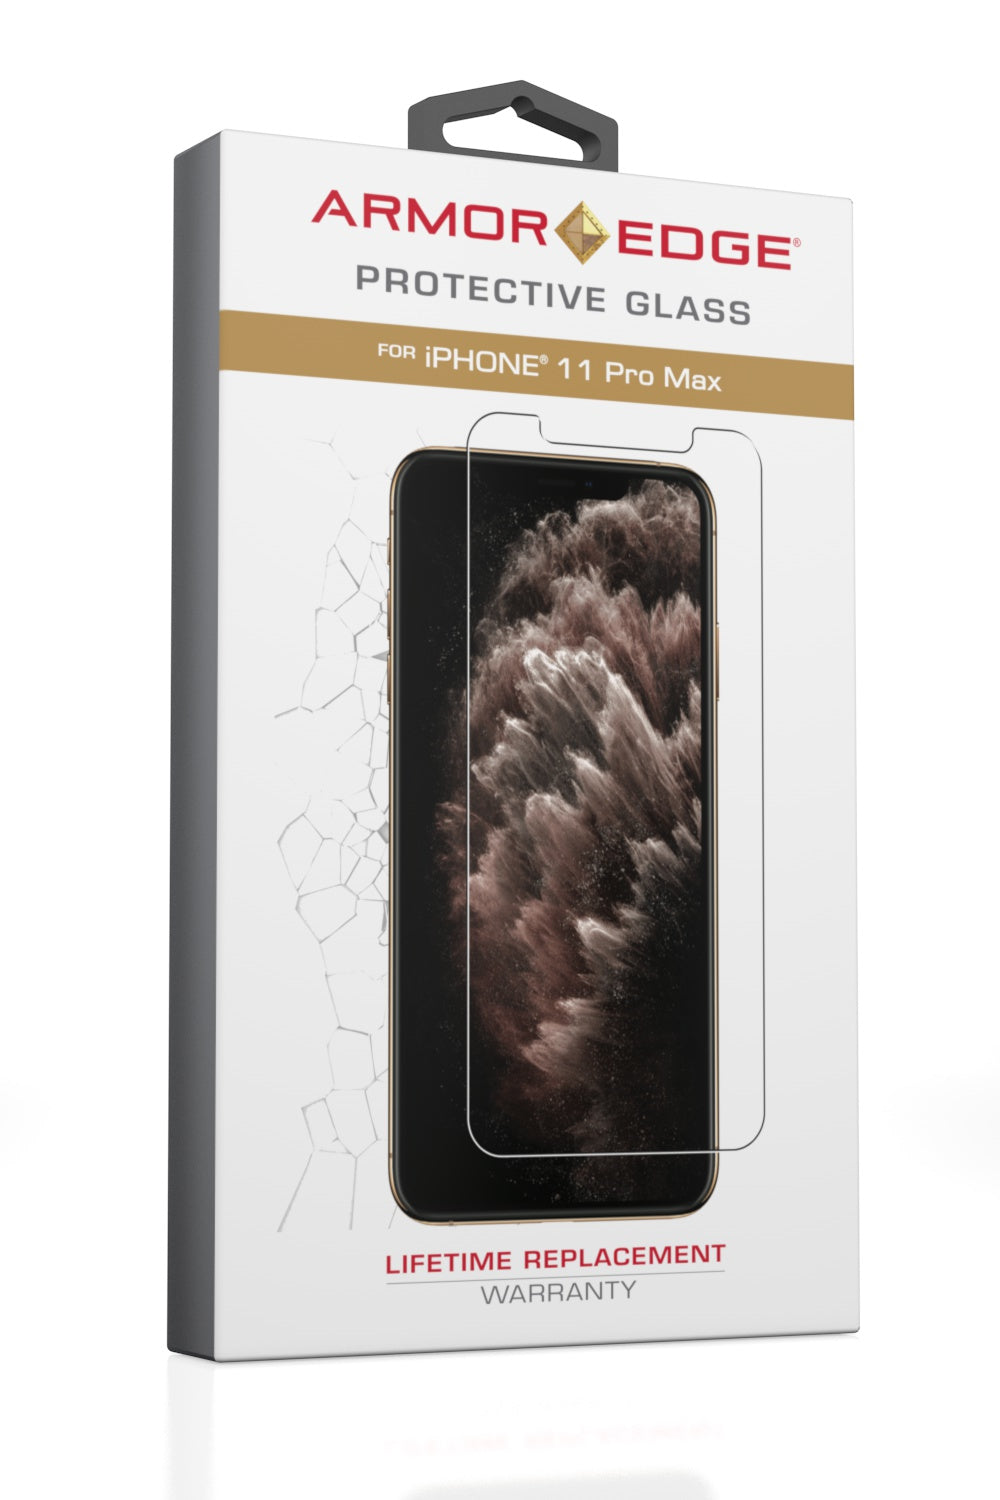 Armor Edge - Protective Glass for iPhone 11 Pro Max